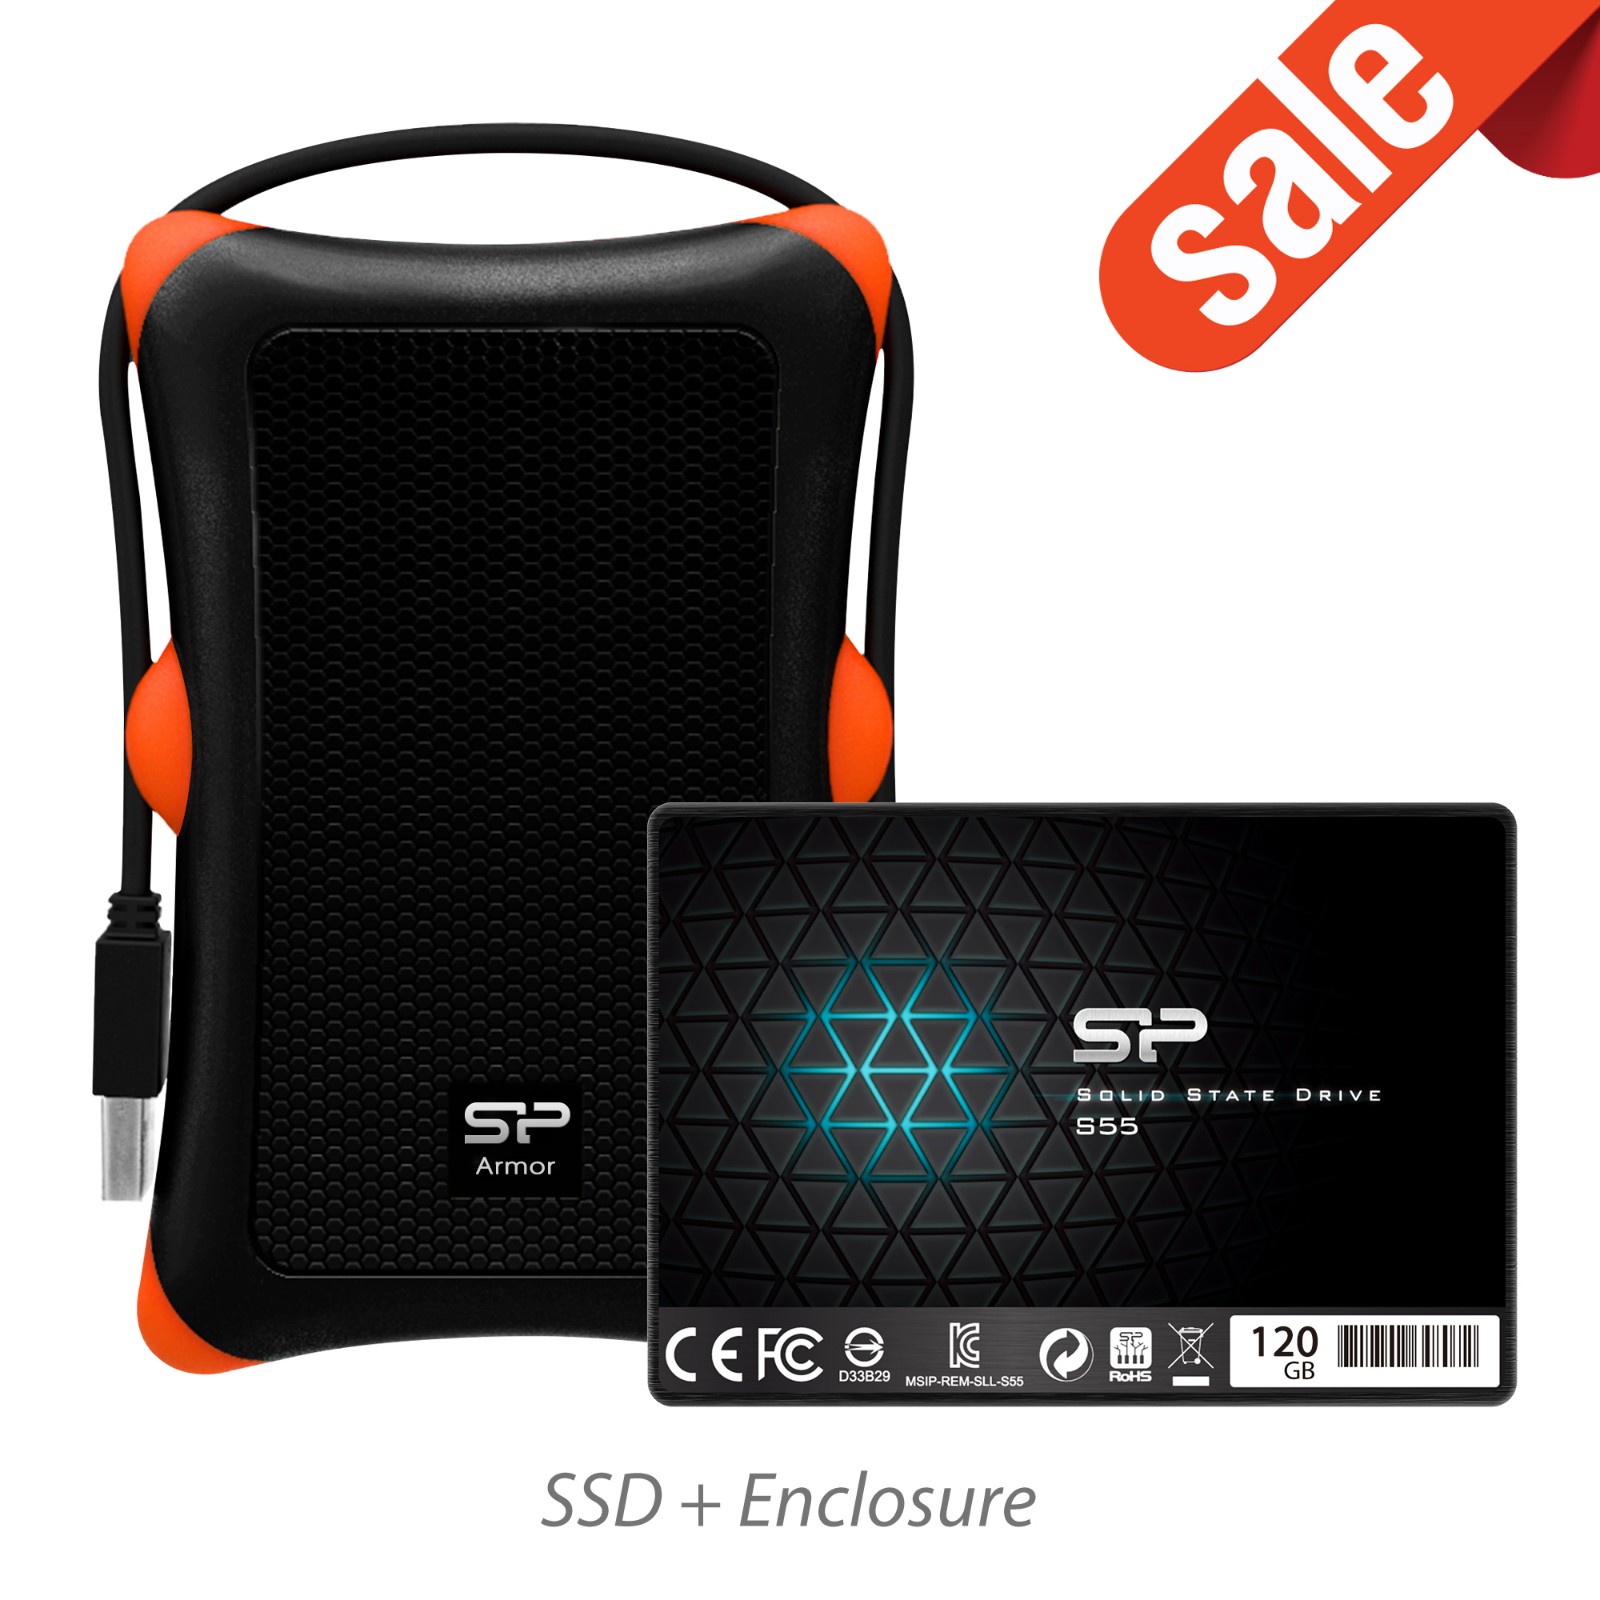 Silicon Power 120GB S55 SSD Upgrade Kit w/Shockproof enclosure